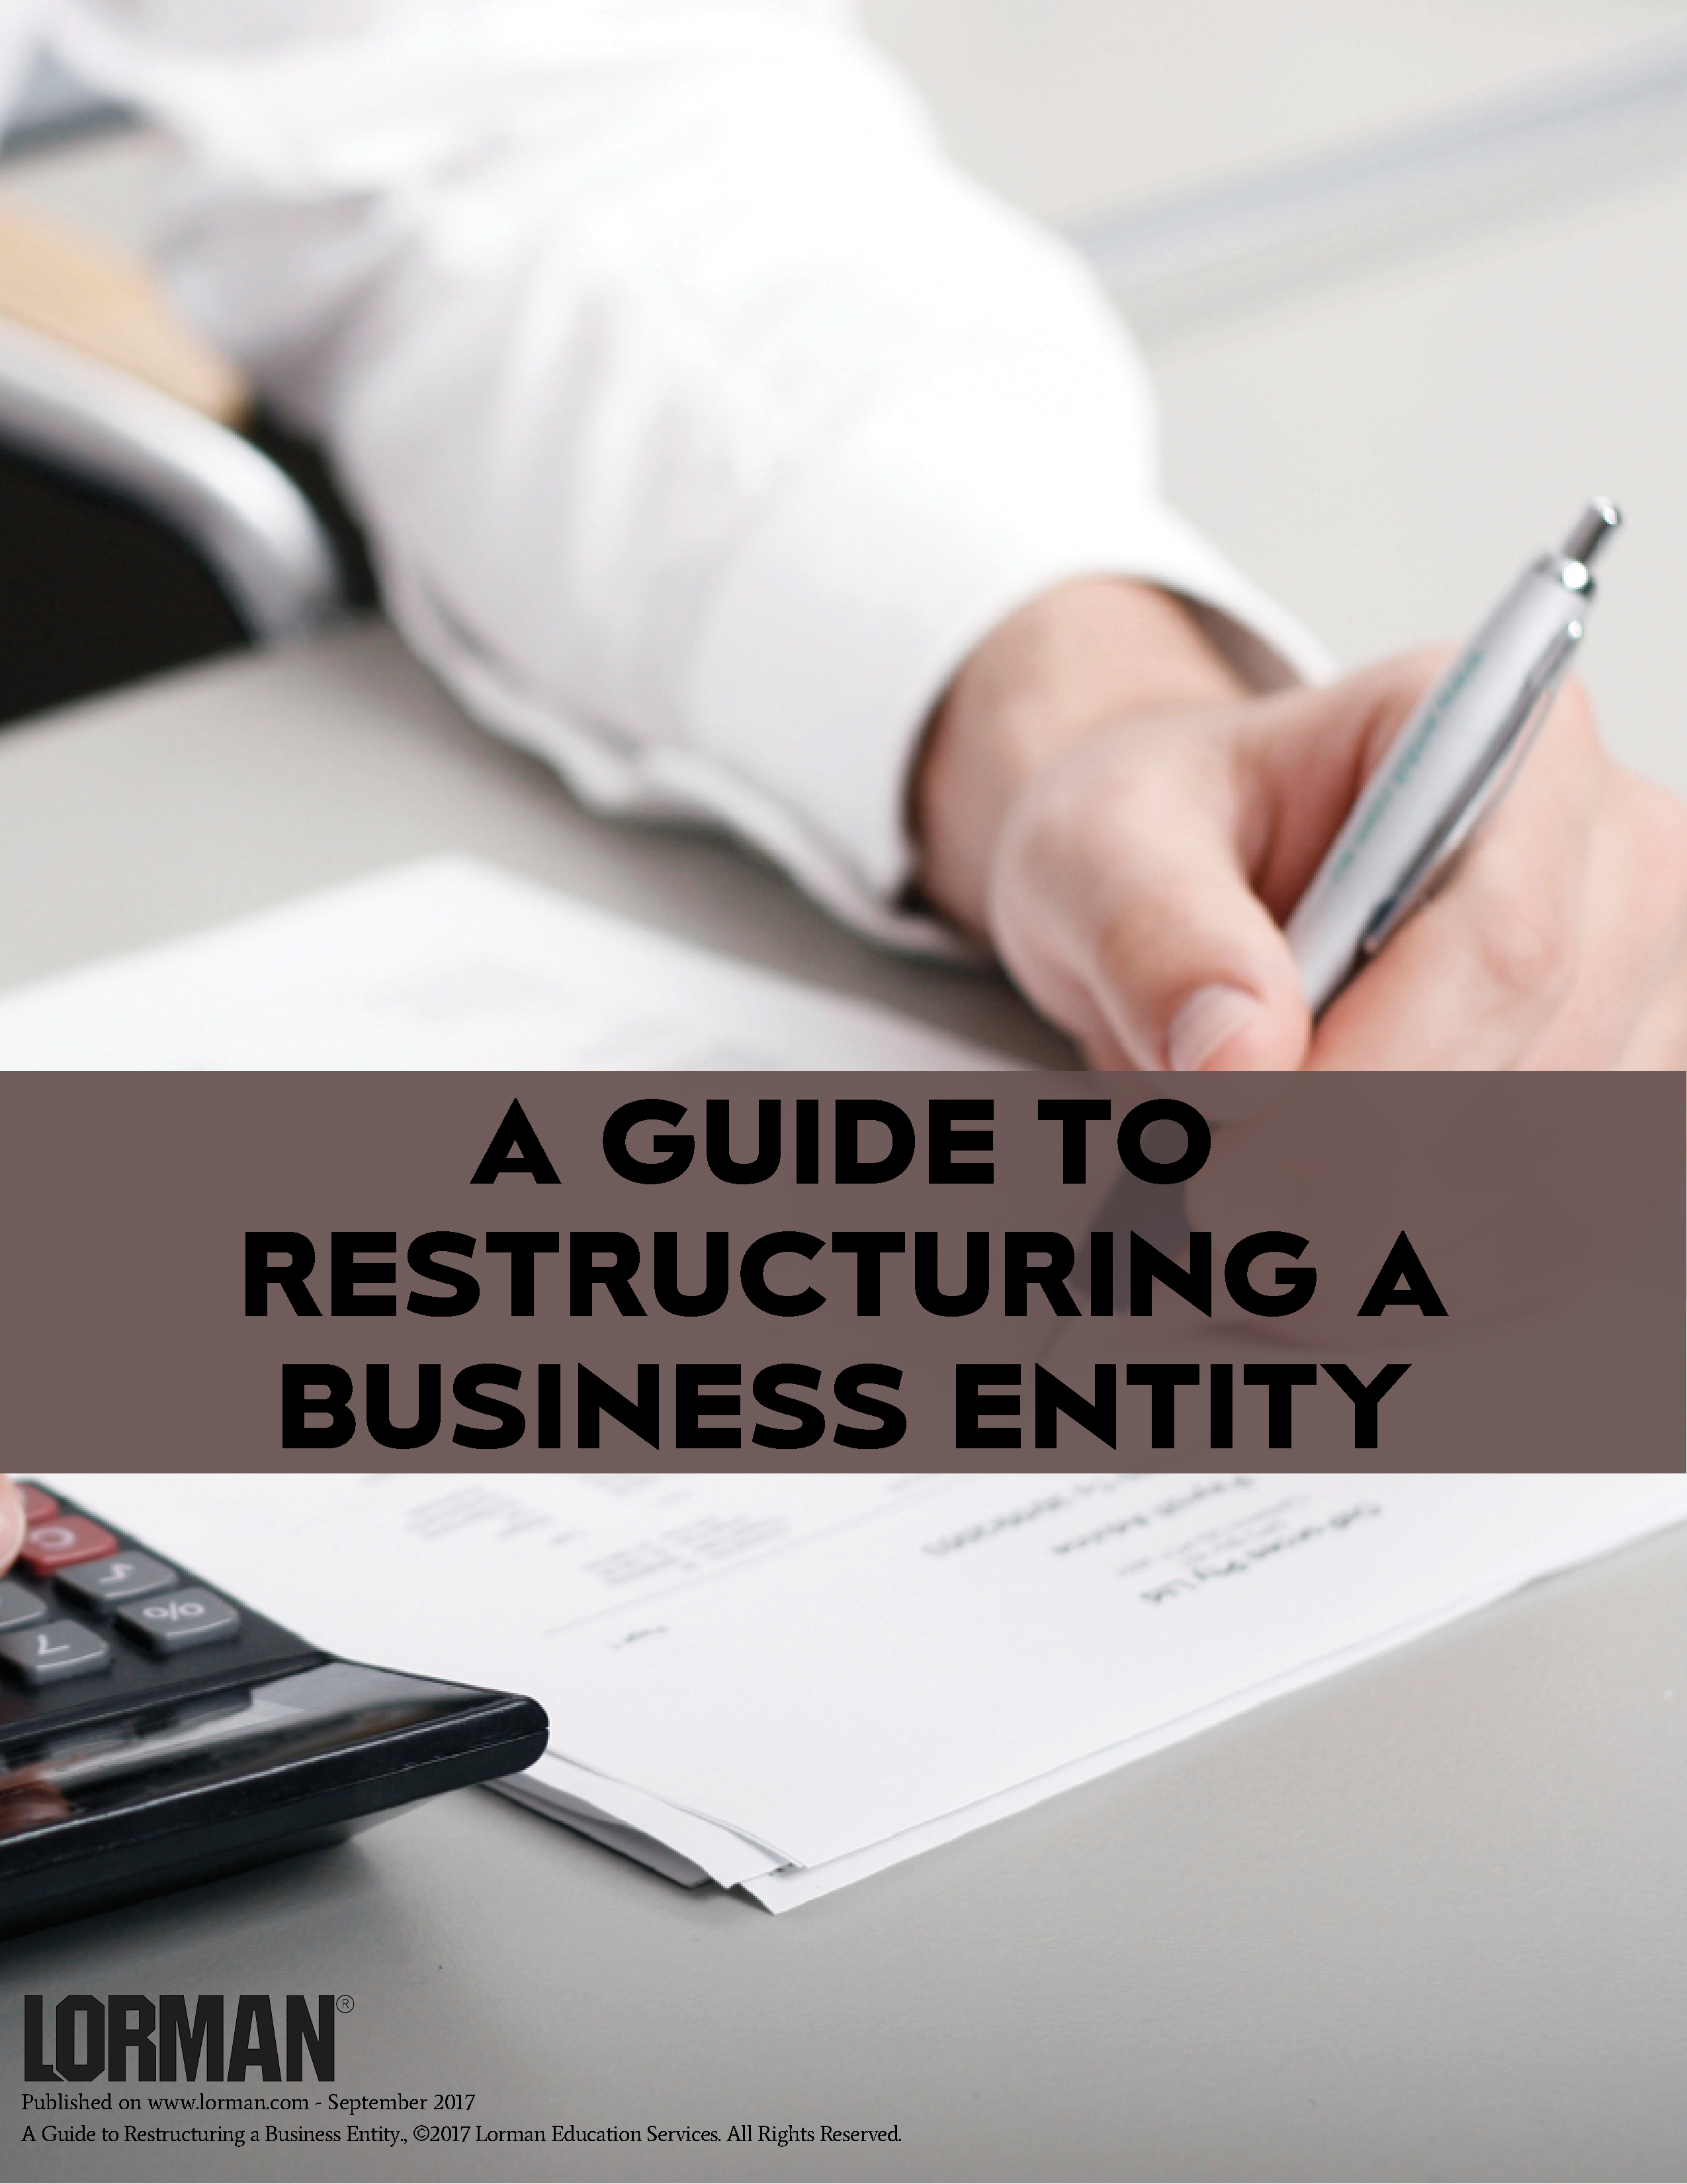 A Guide to Restructuring a Business Entity